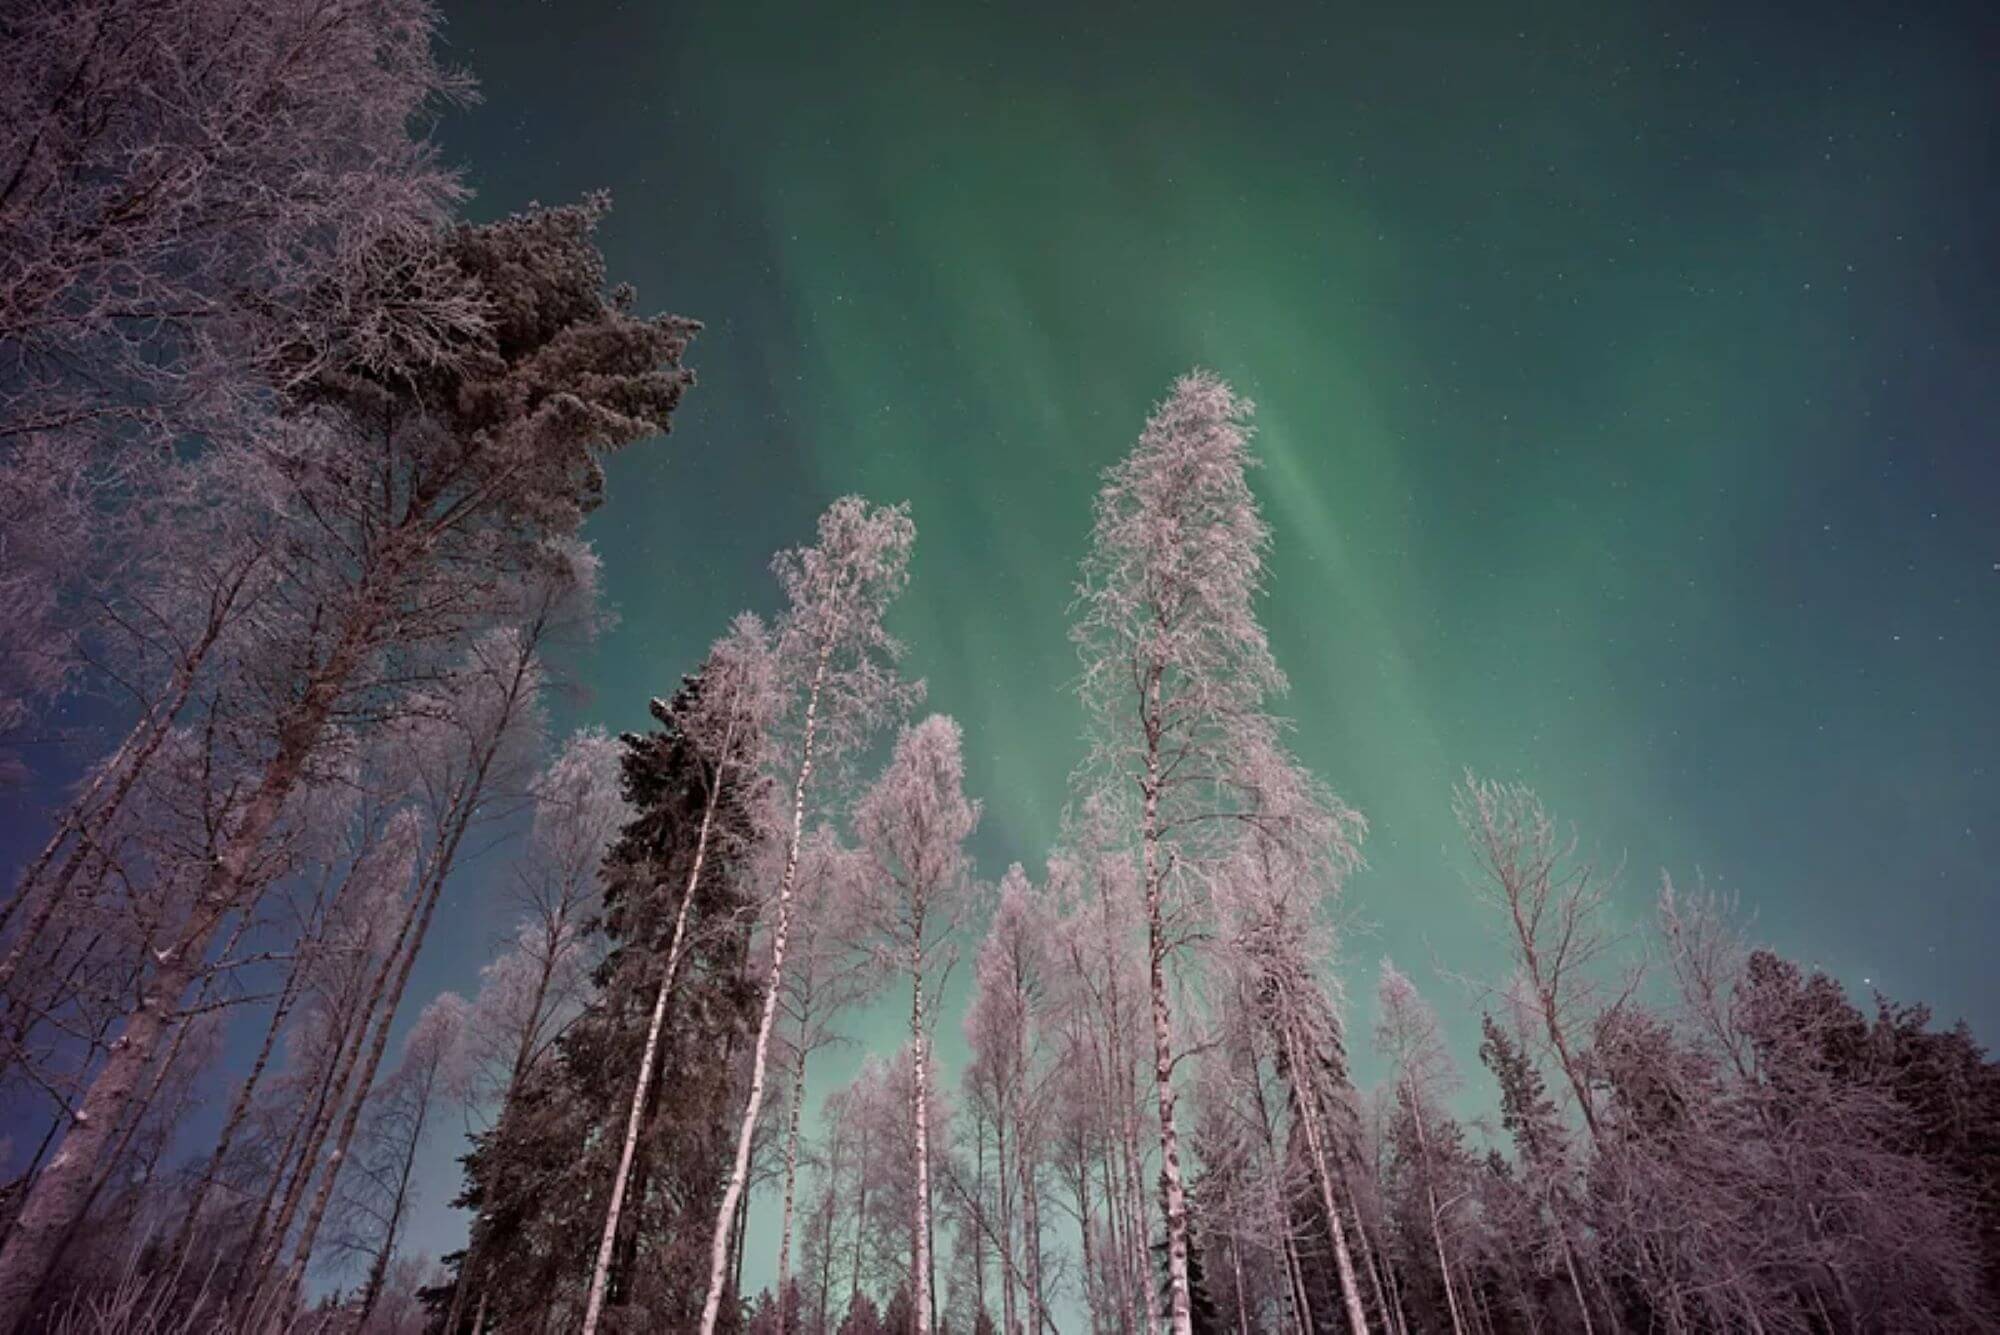 trees covered with snow, standing tall in a forest with the night skies blazing with the northern lights